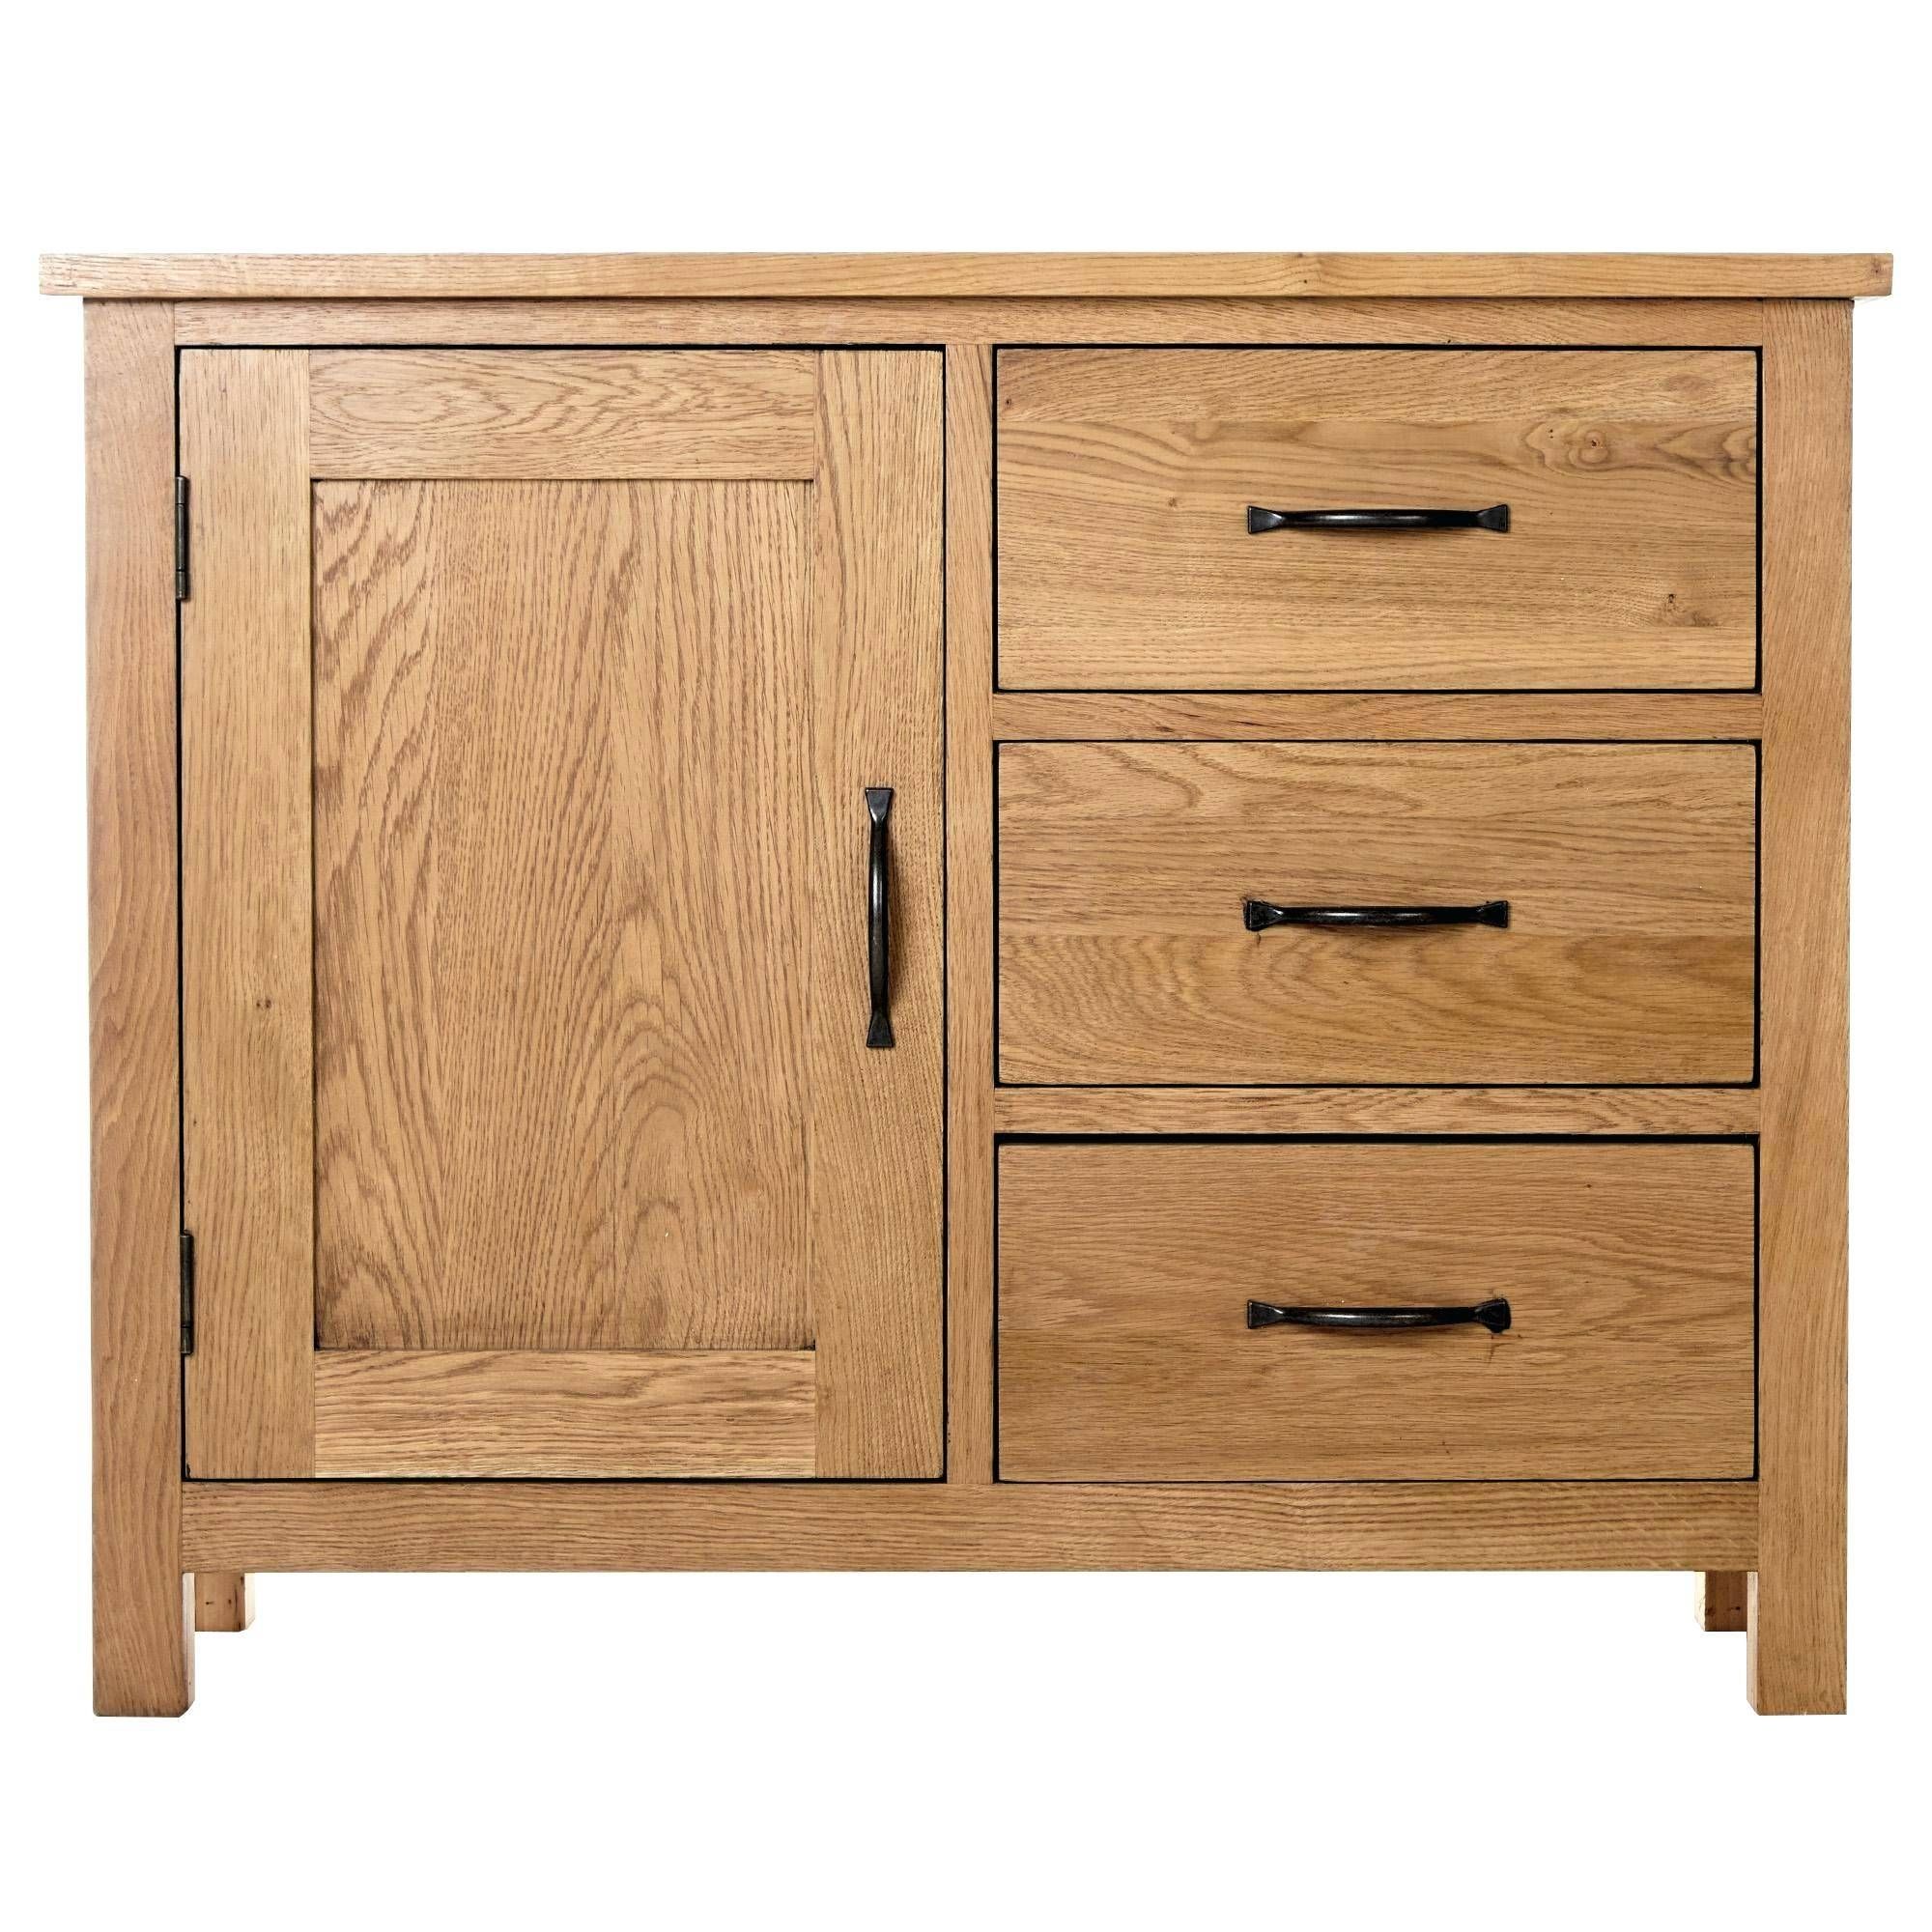 Wooden Sideboards Oak Sideboards Uk Only – Roborob (View 6 of 15)